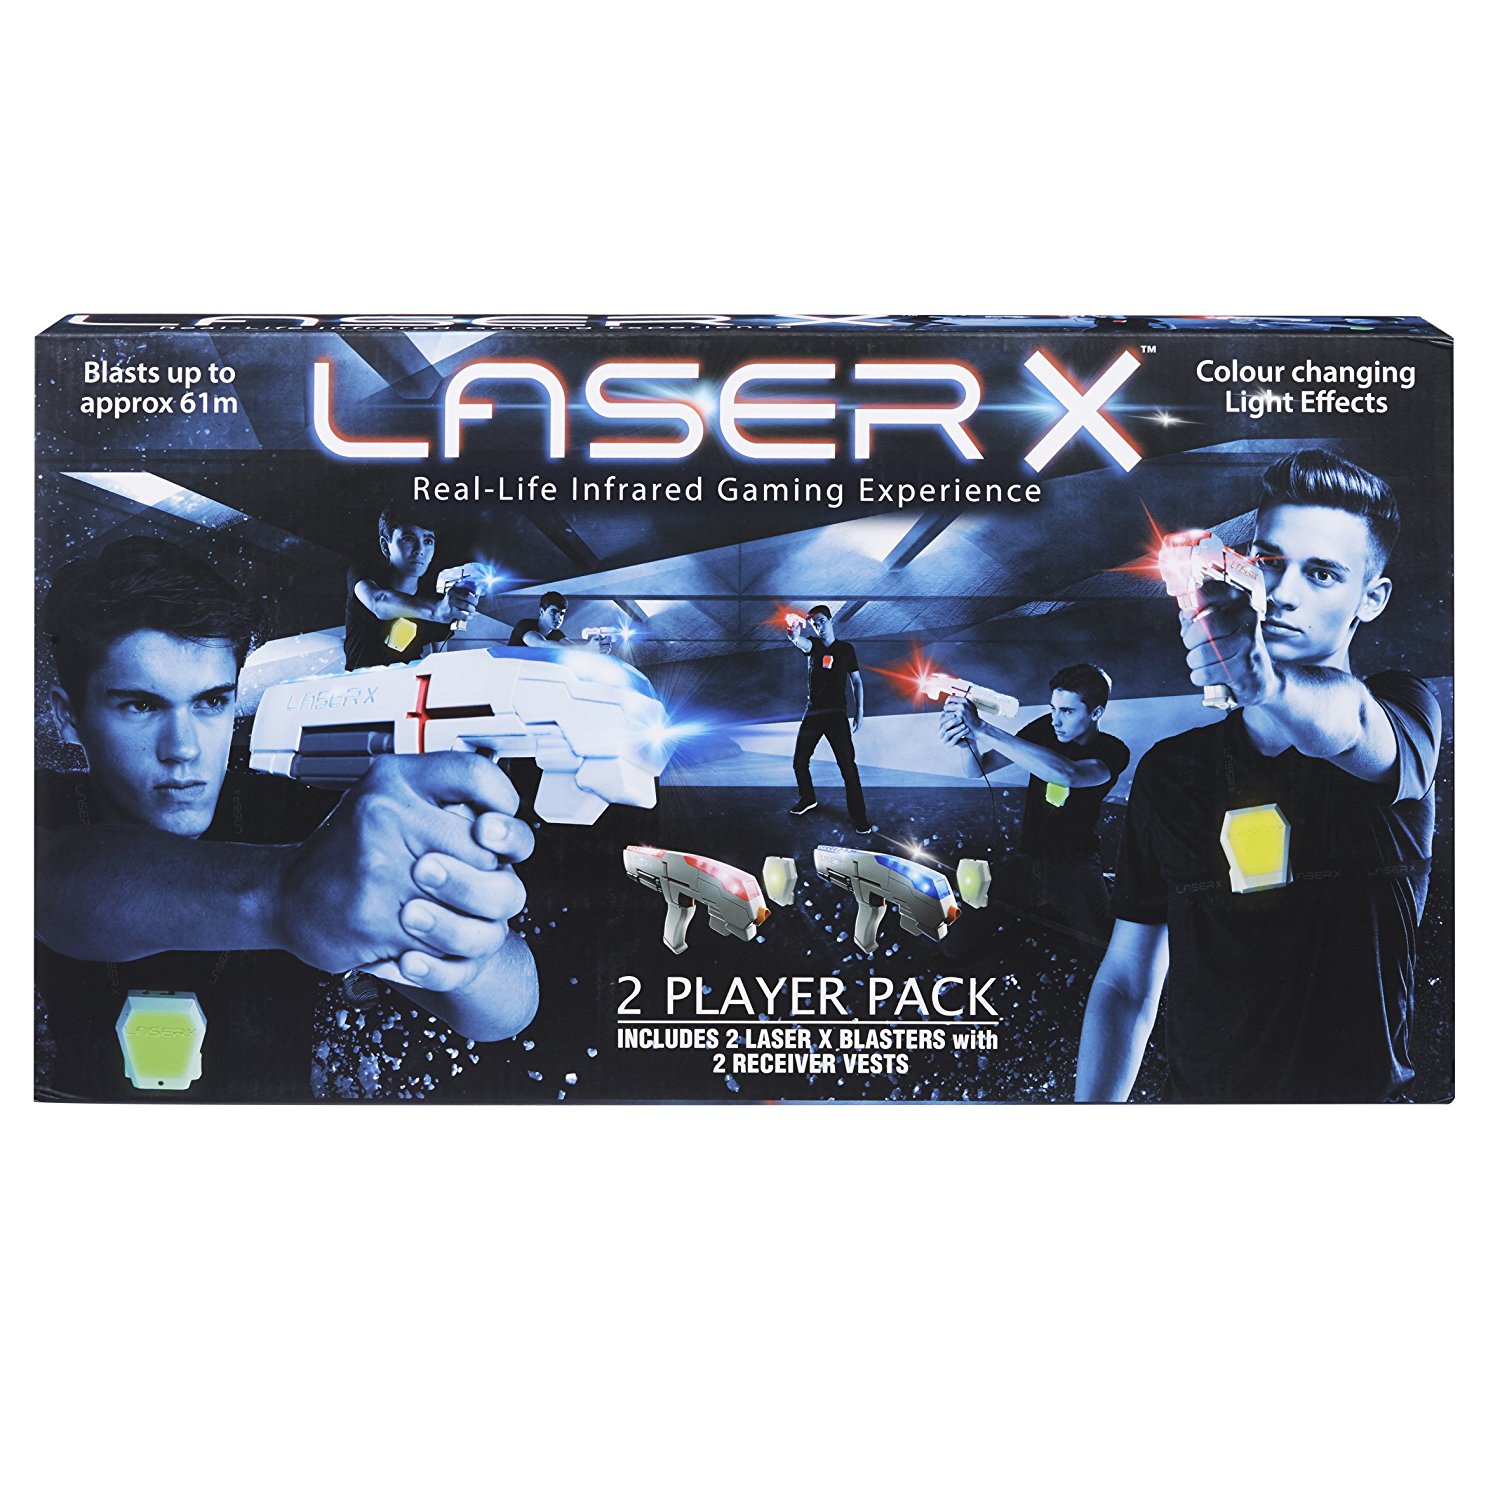 Laser Tag TwoPlayer Game by FAO SCHWARZ NEW IN BOX eBay